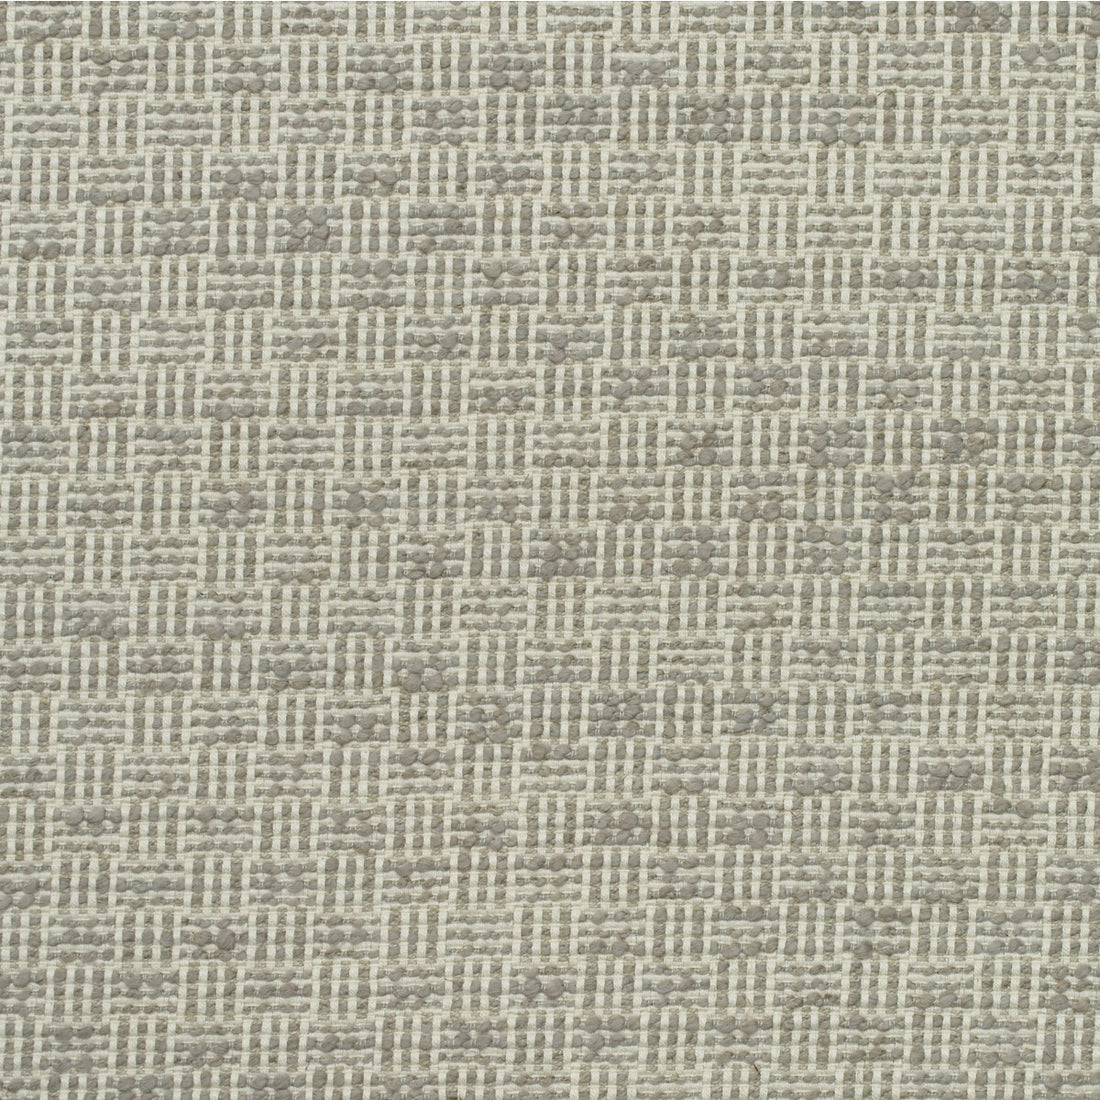 Flint fabric in mushroom color - pattern AM100395.166.0 - by Kravet Couture in the Andrew Martin Woodland By Sophie Paterson collection